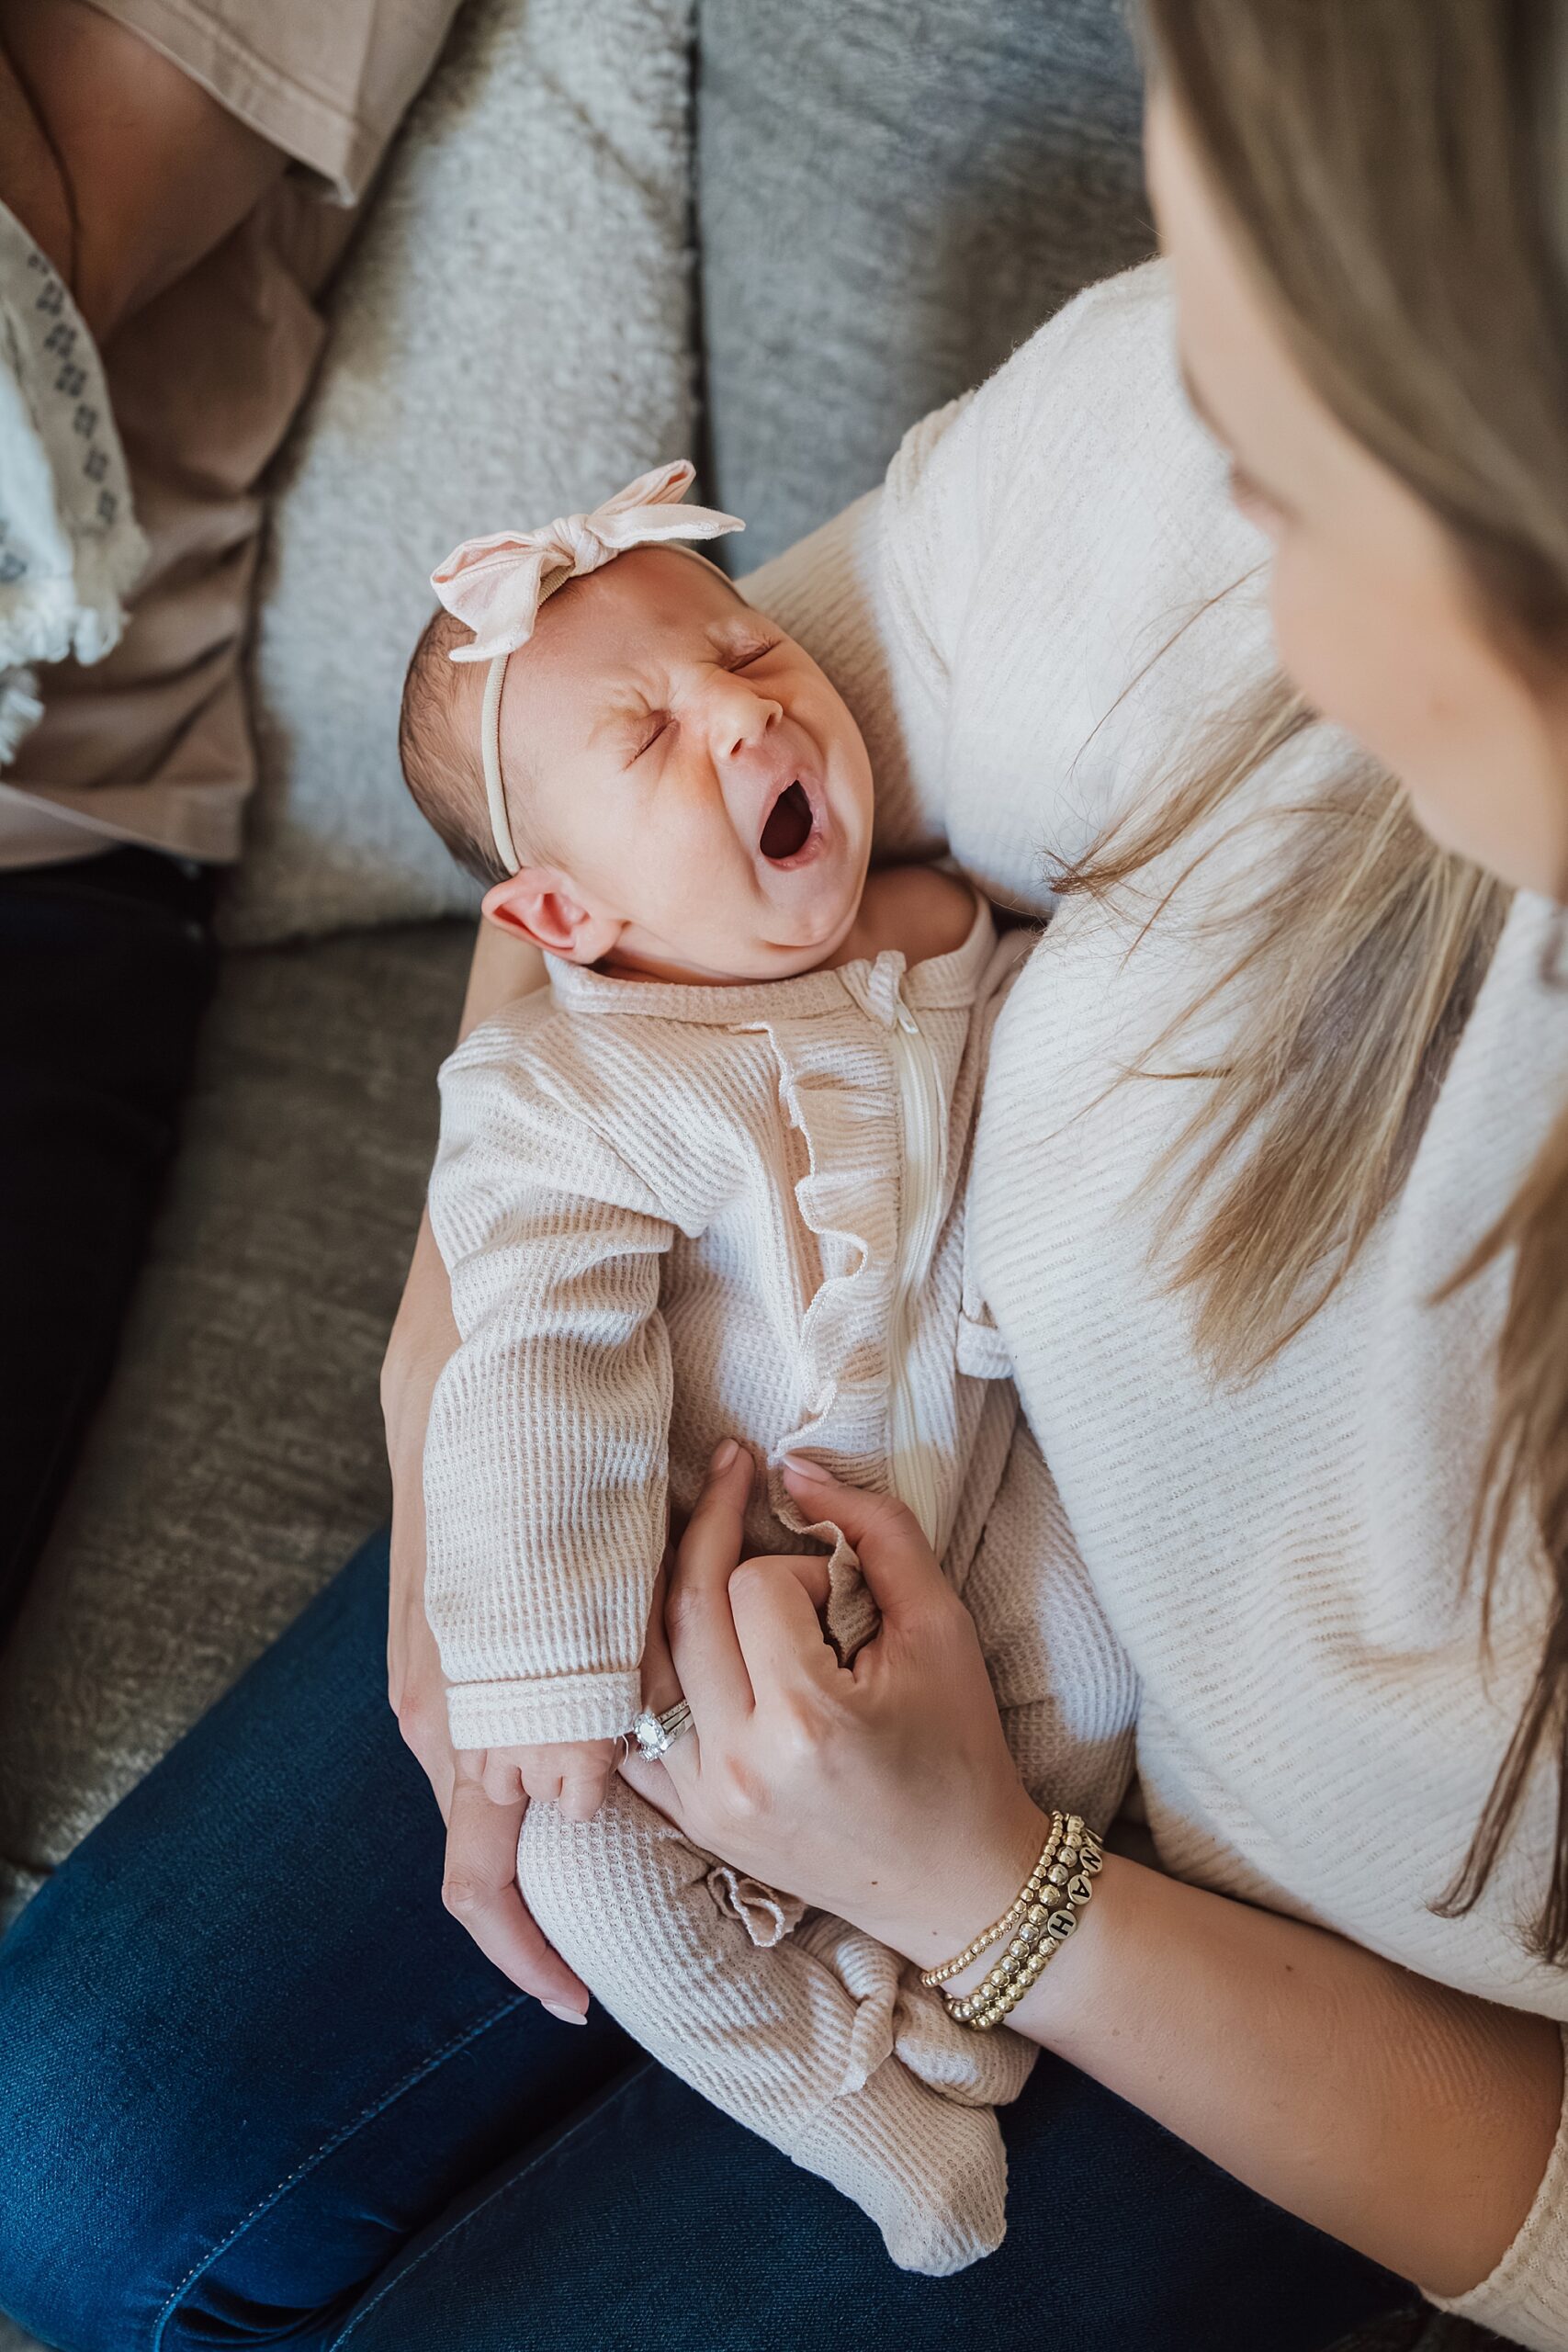 A baby yawning while being cradled in a woman's arms.